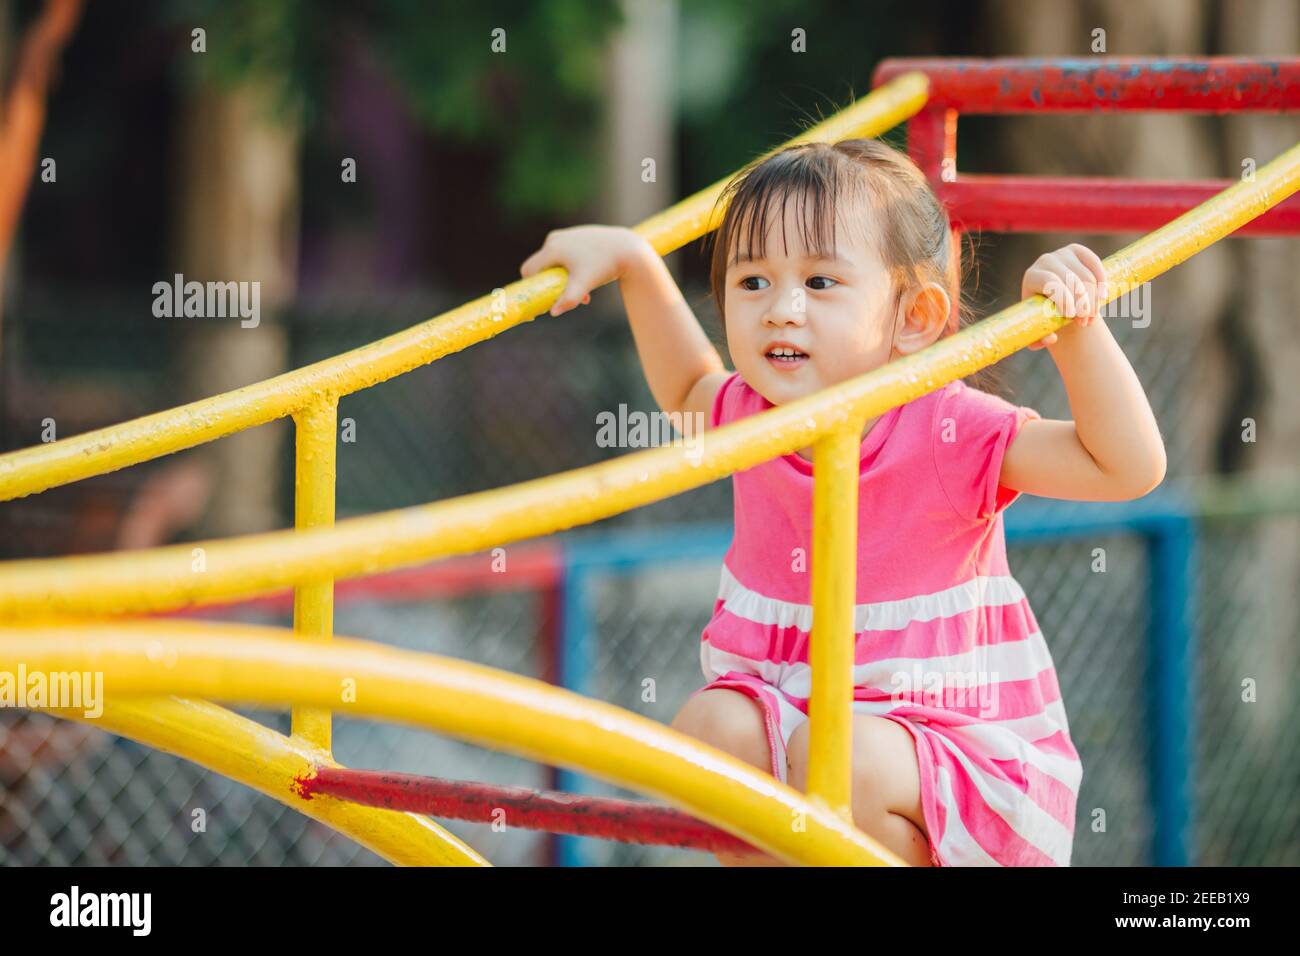 School kids play and learn in the playgound. Physical activity like climbing are good for develop movement and muscle in children Stock Photo